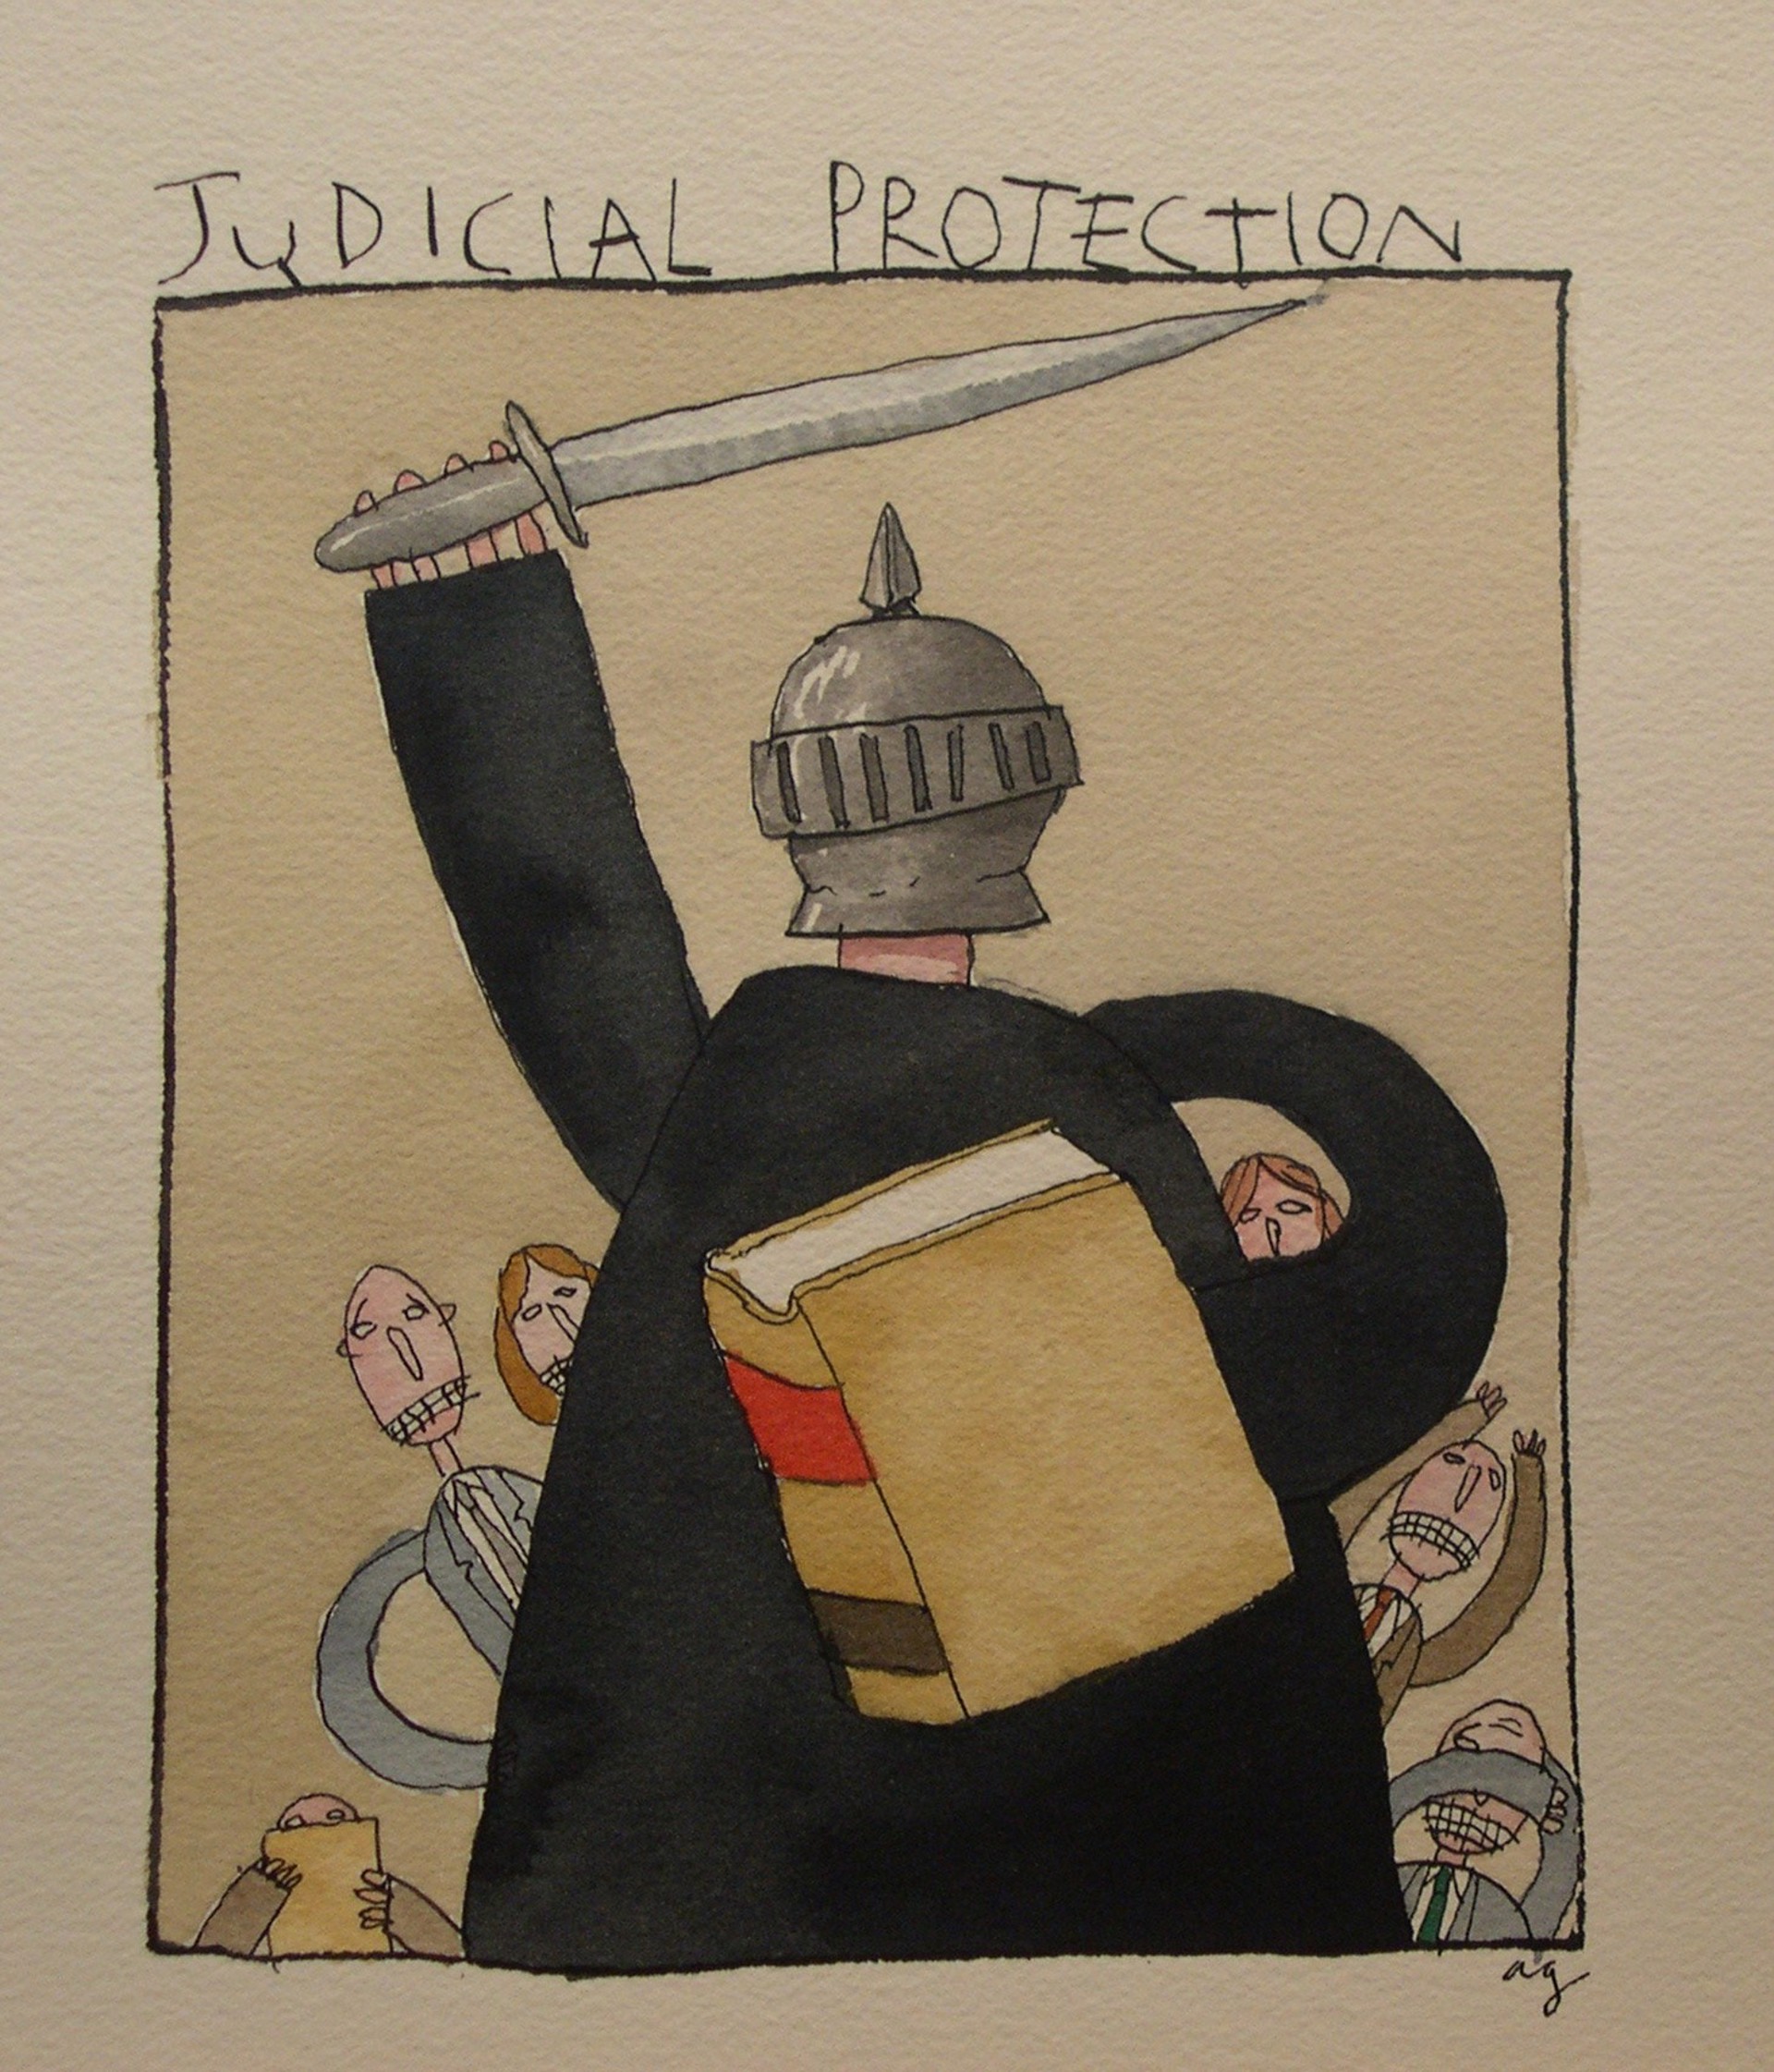 Judicial Protection by Alan Gerson